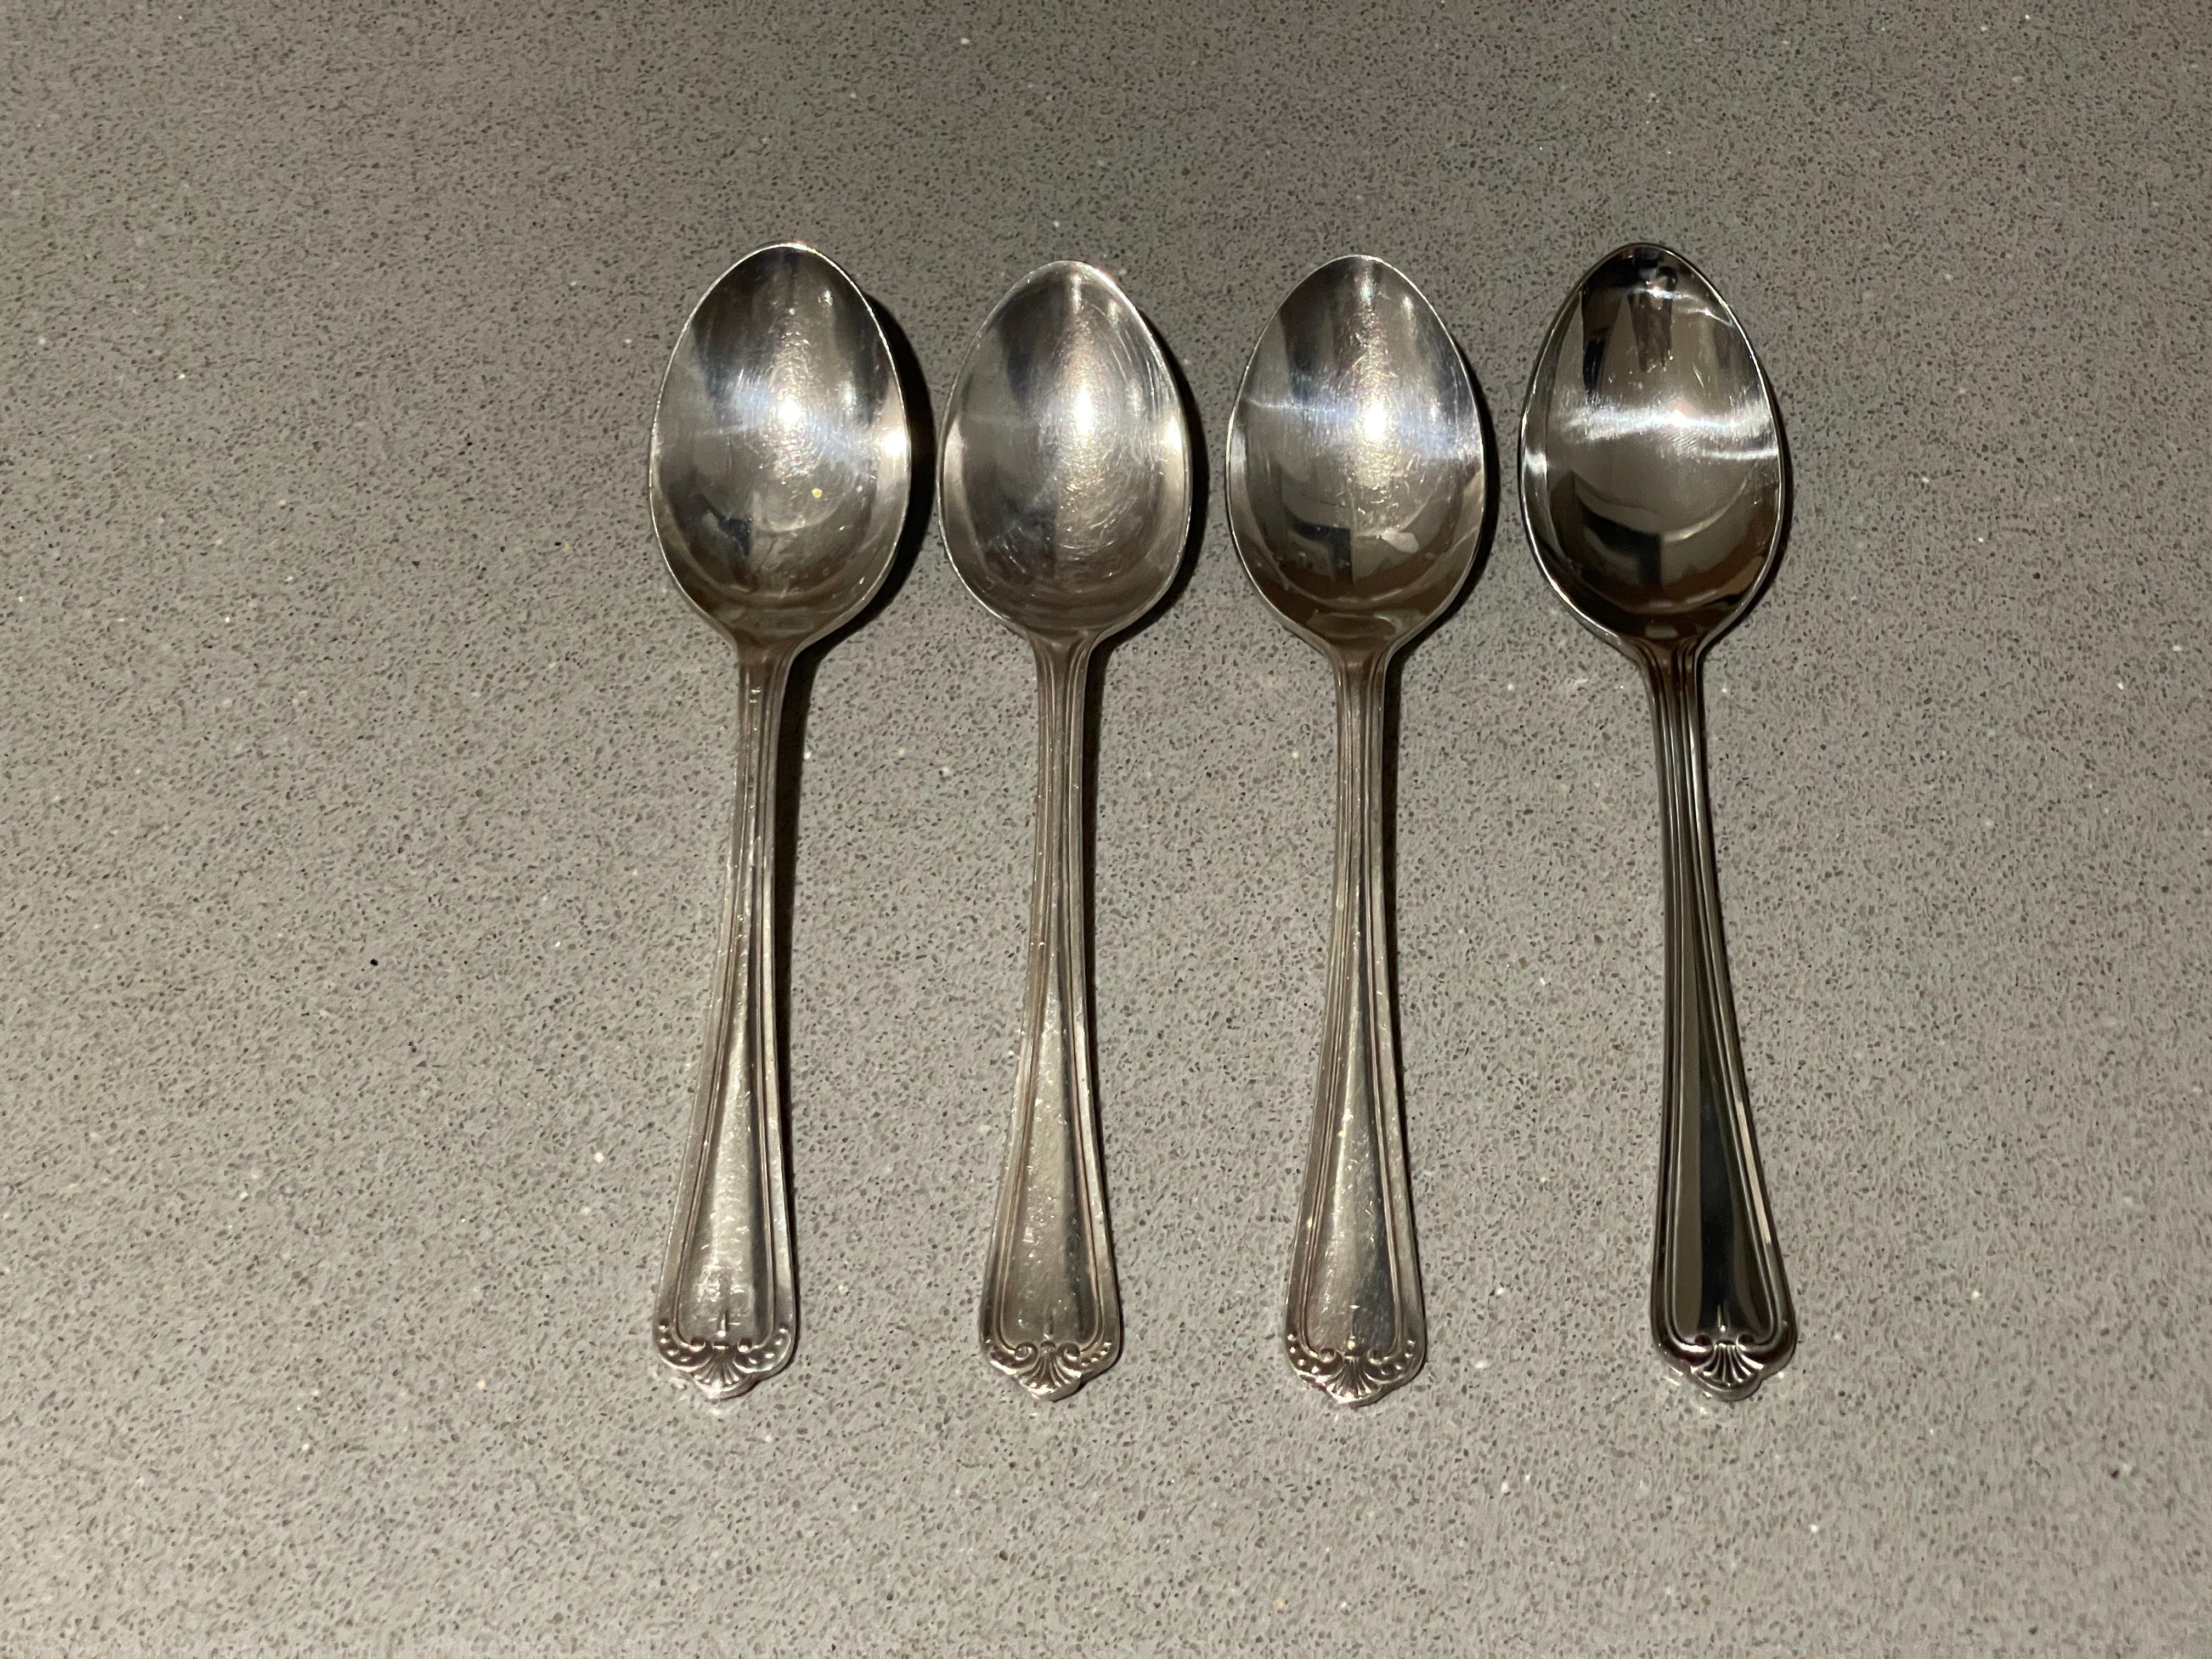 
A Set of 4 English Stainless Sheffield England Espresso Coffee or Tea Demitasse Spoons
Four beautiful English stainless Sheffield espresso coffee or tea demitasse spoons in the style of Art Deco, circa early to mid-20th century England. Beautiful